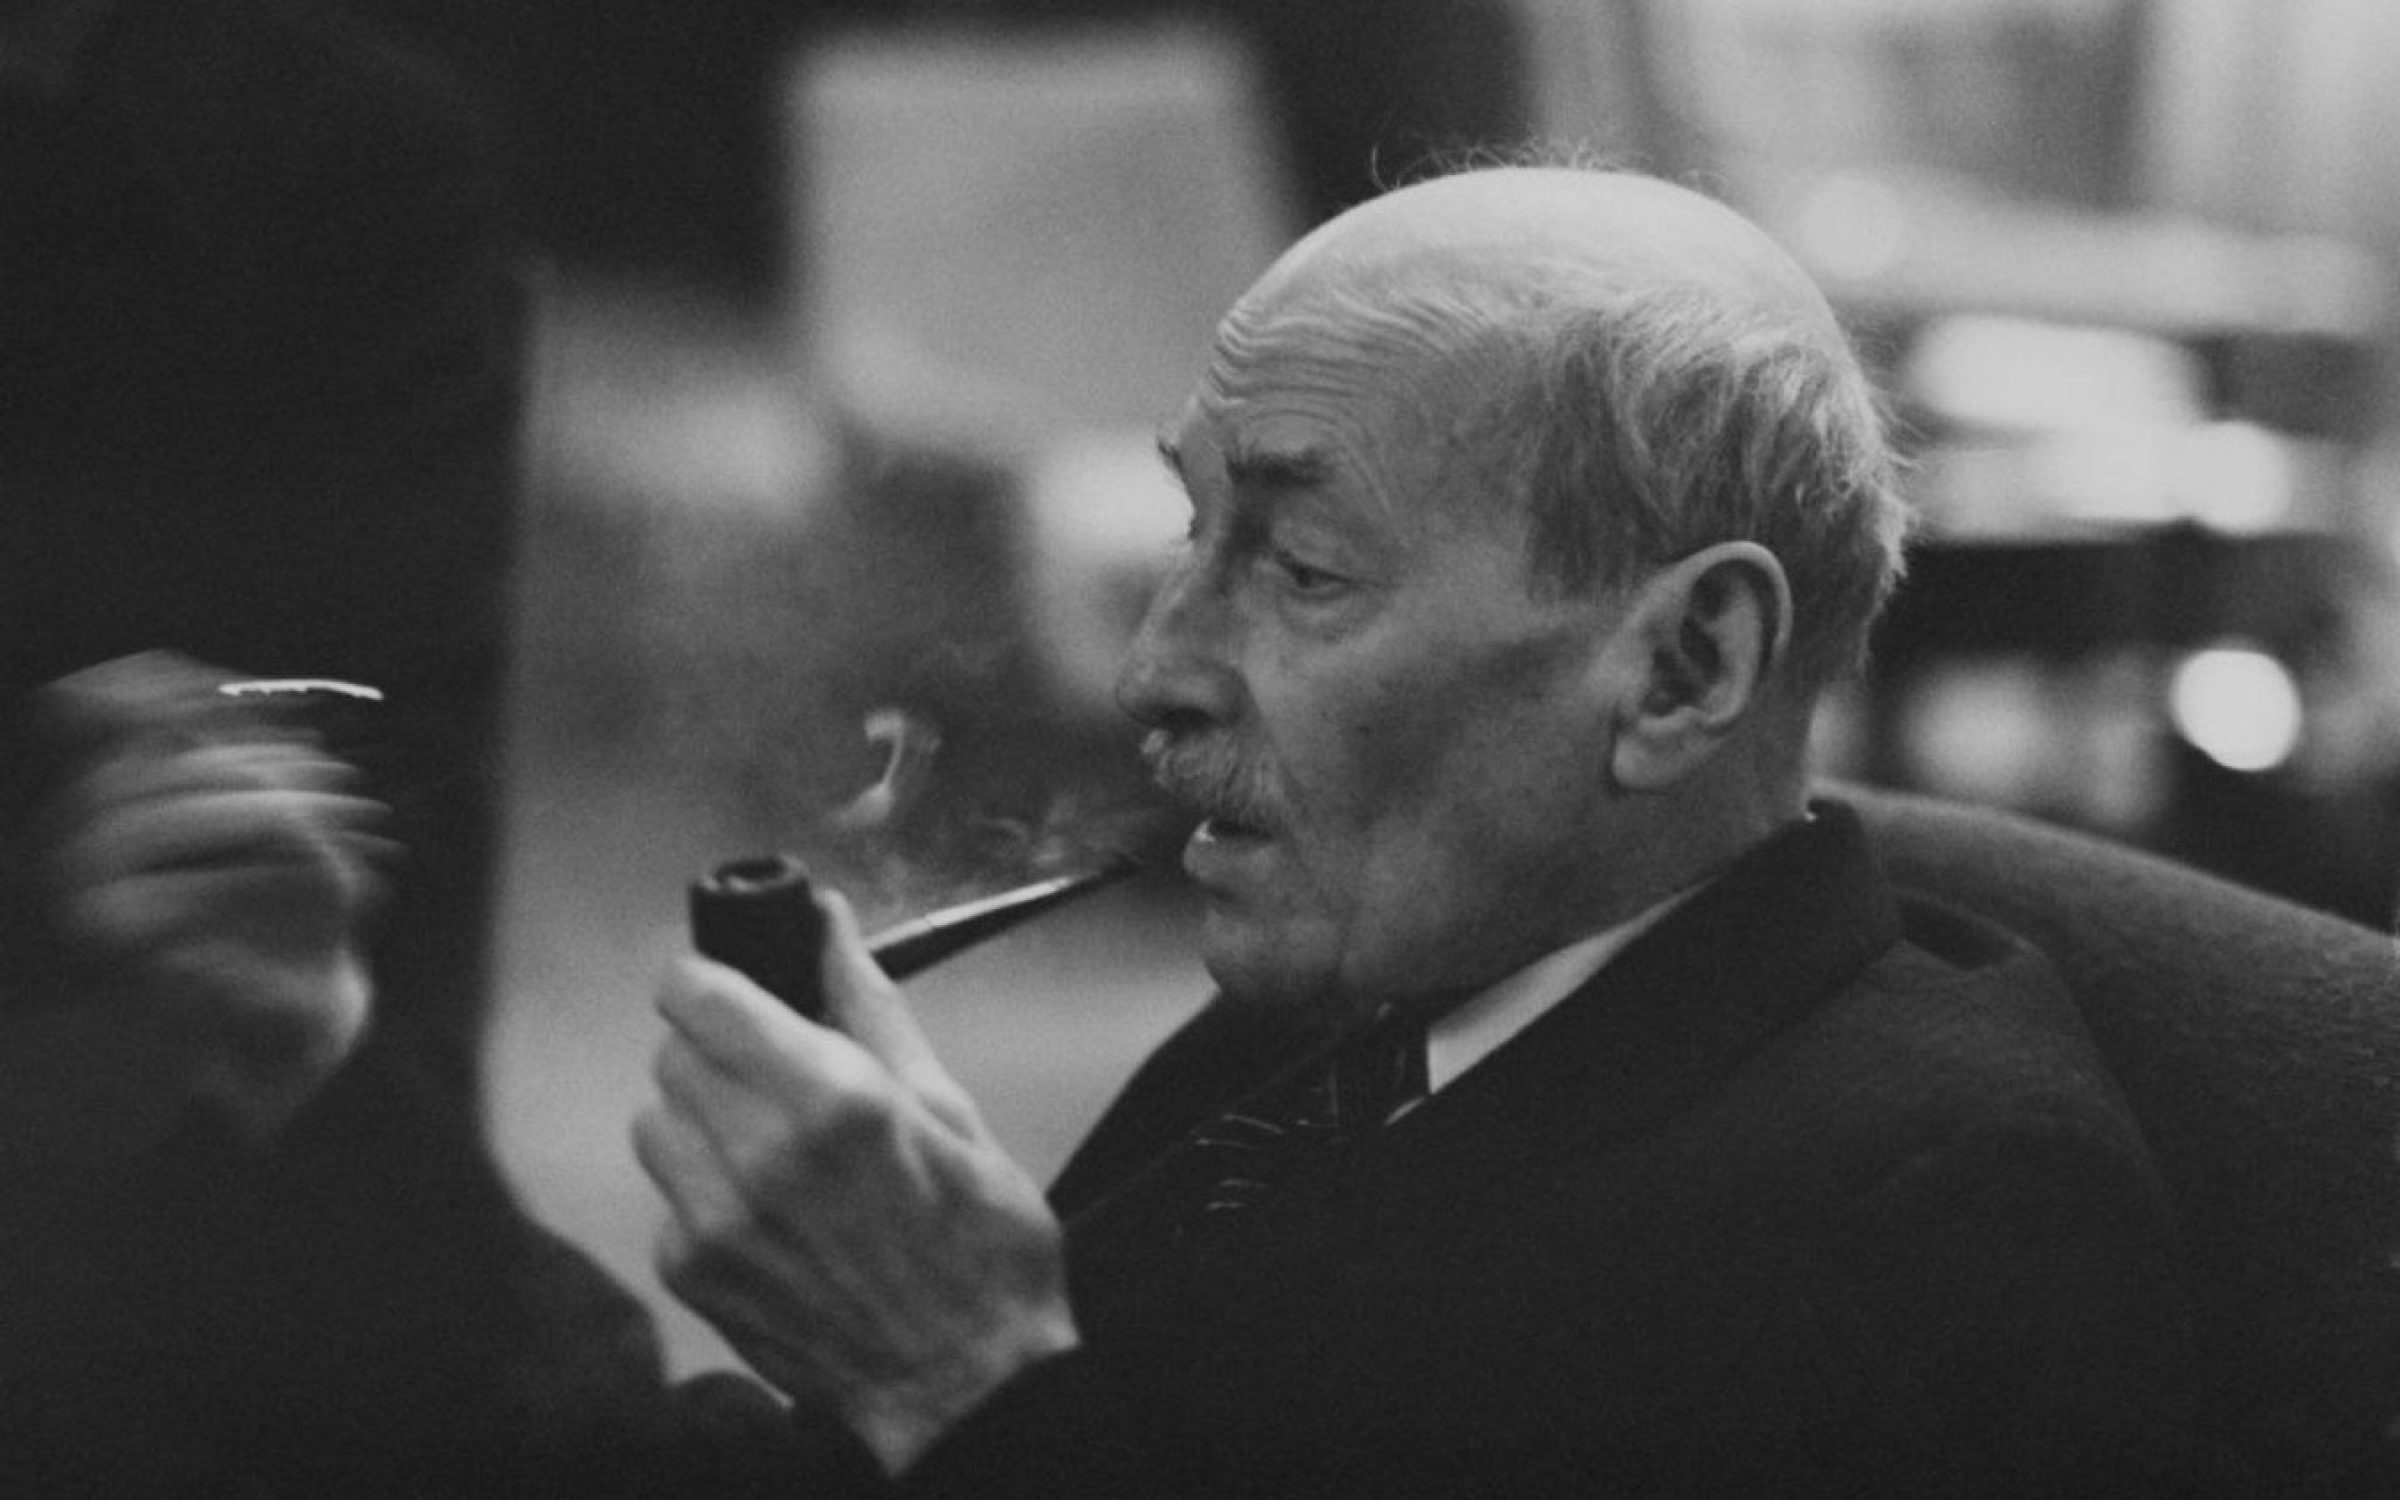 English Labour Party politician and former Prime Minister of the United Kingdom, Clement Attlee (1883-1967) pictured lighting a pipe as he celebrates his 80th birthday at the Western Hotel in Paddington, London on 3rd January 1963